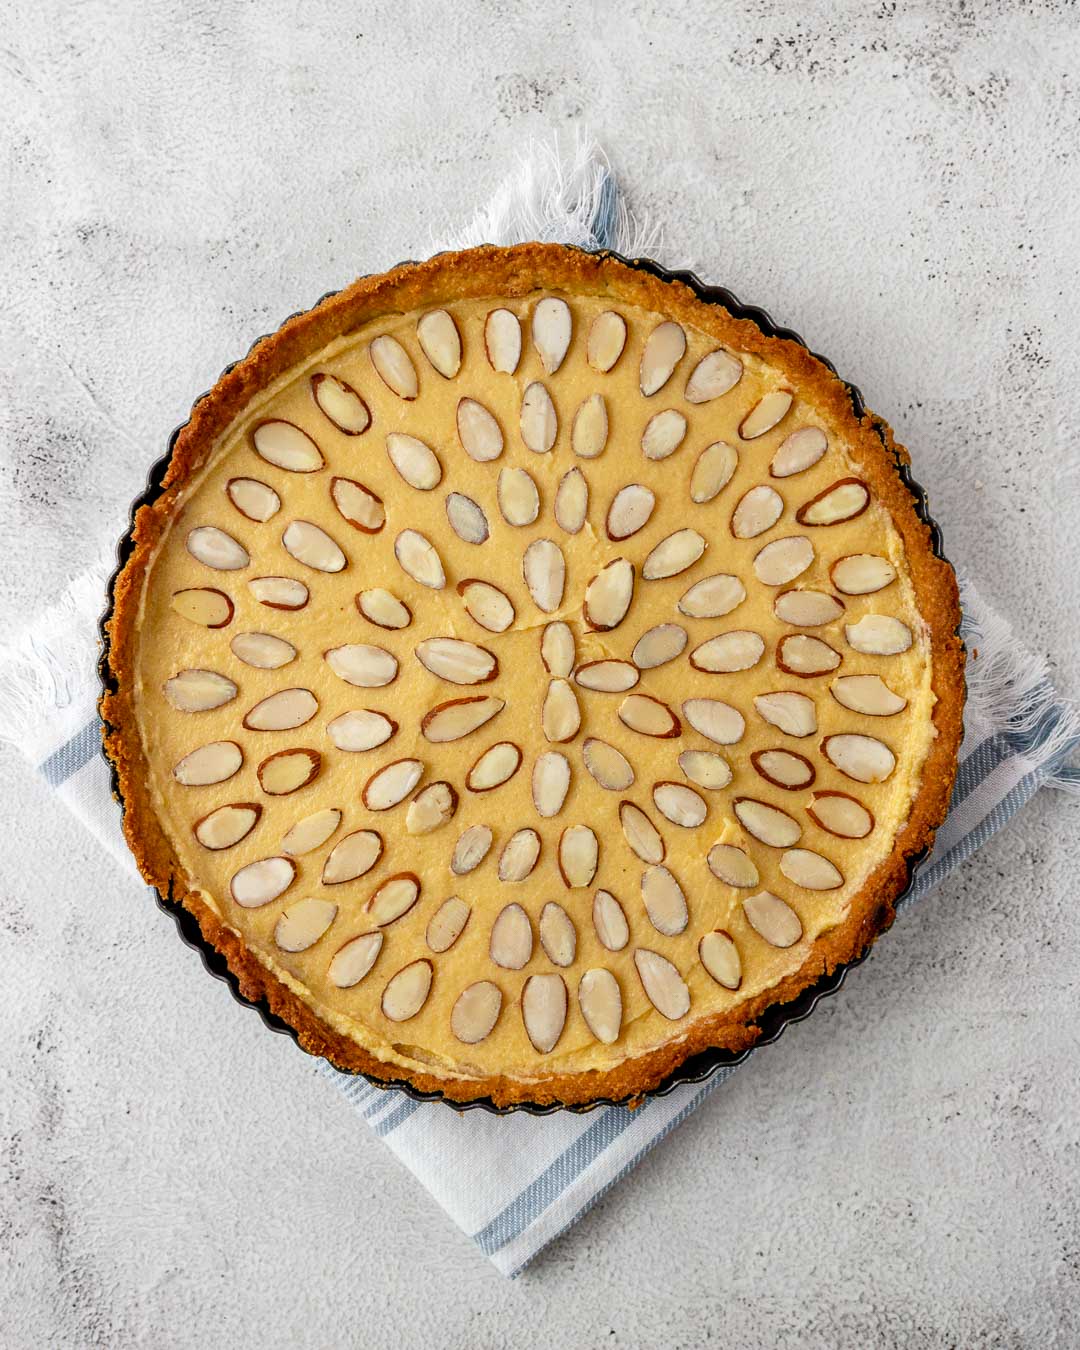 Sliced almonds on the top of the tart